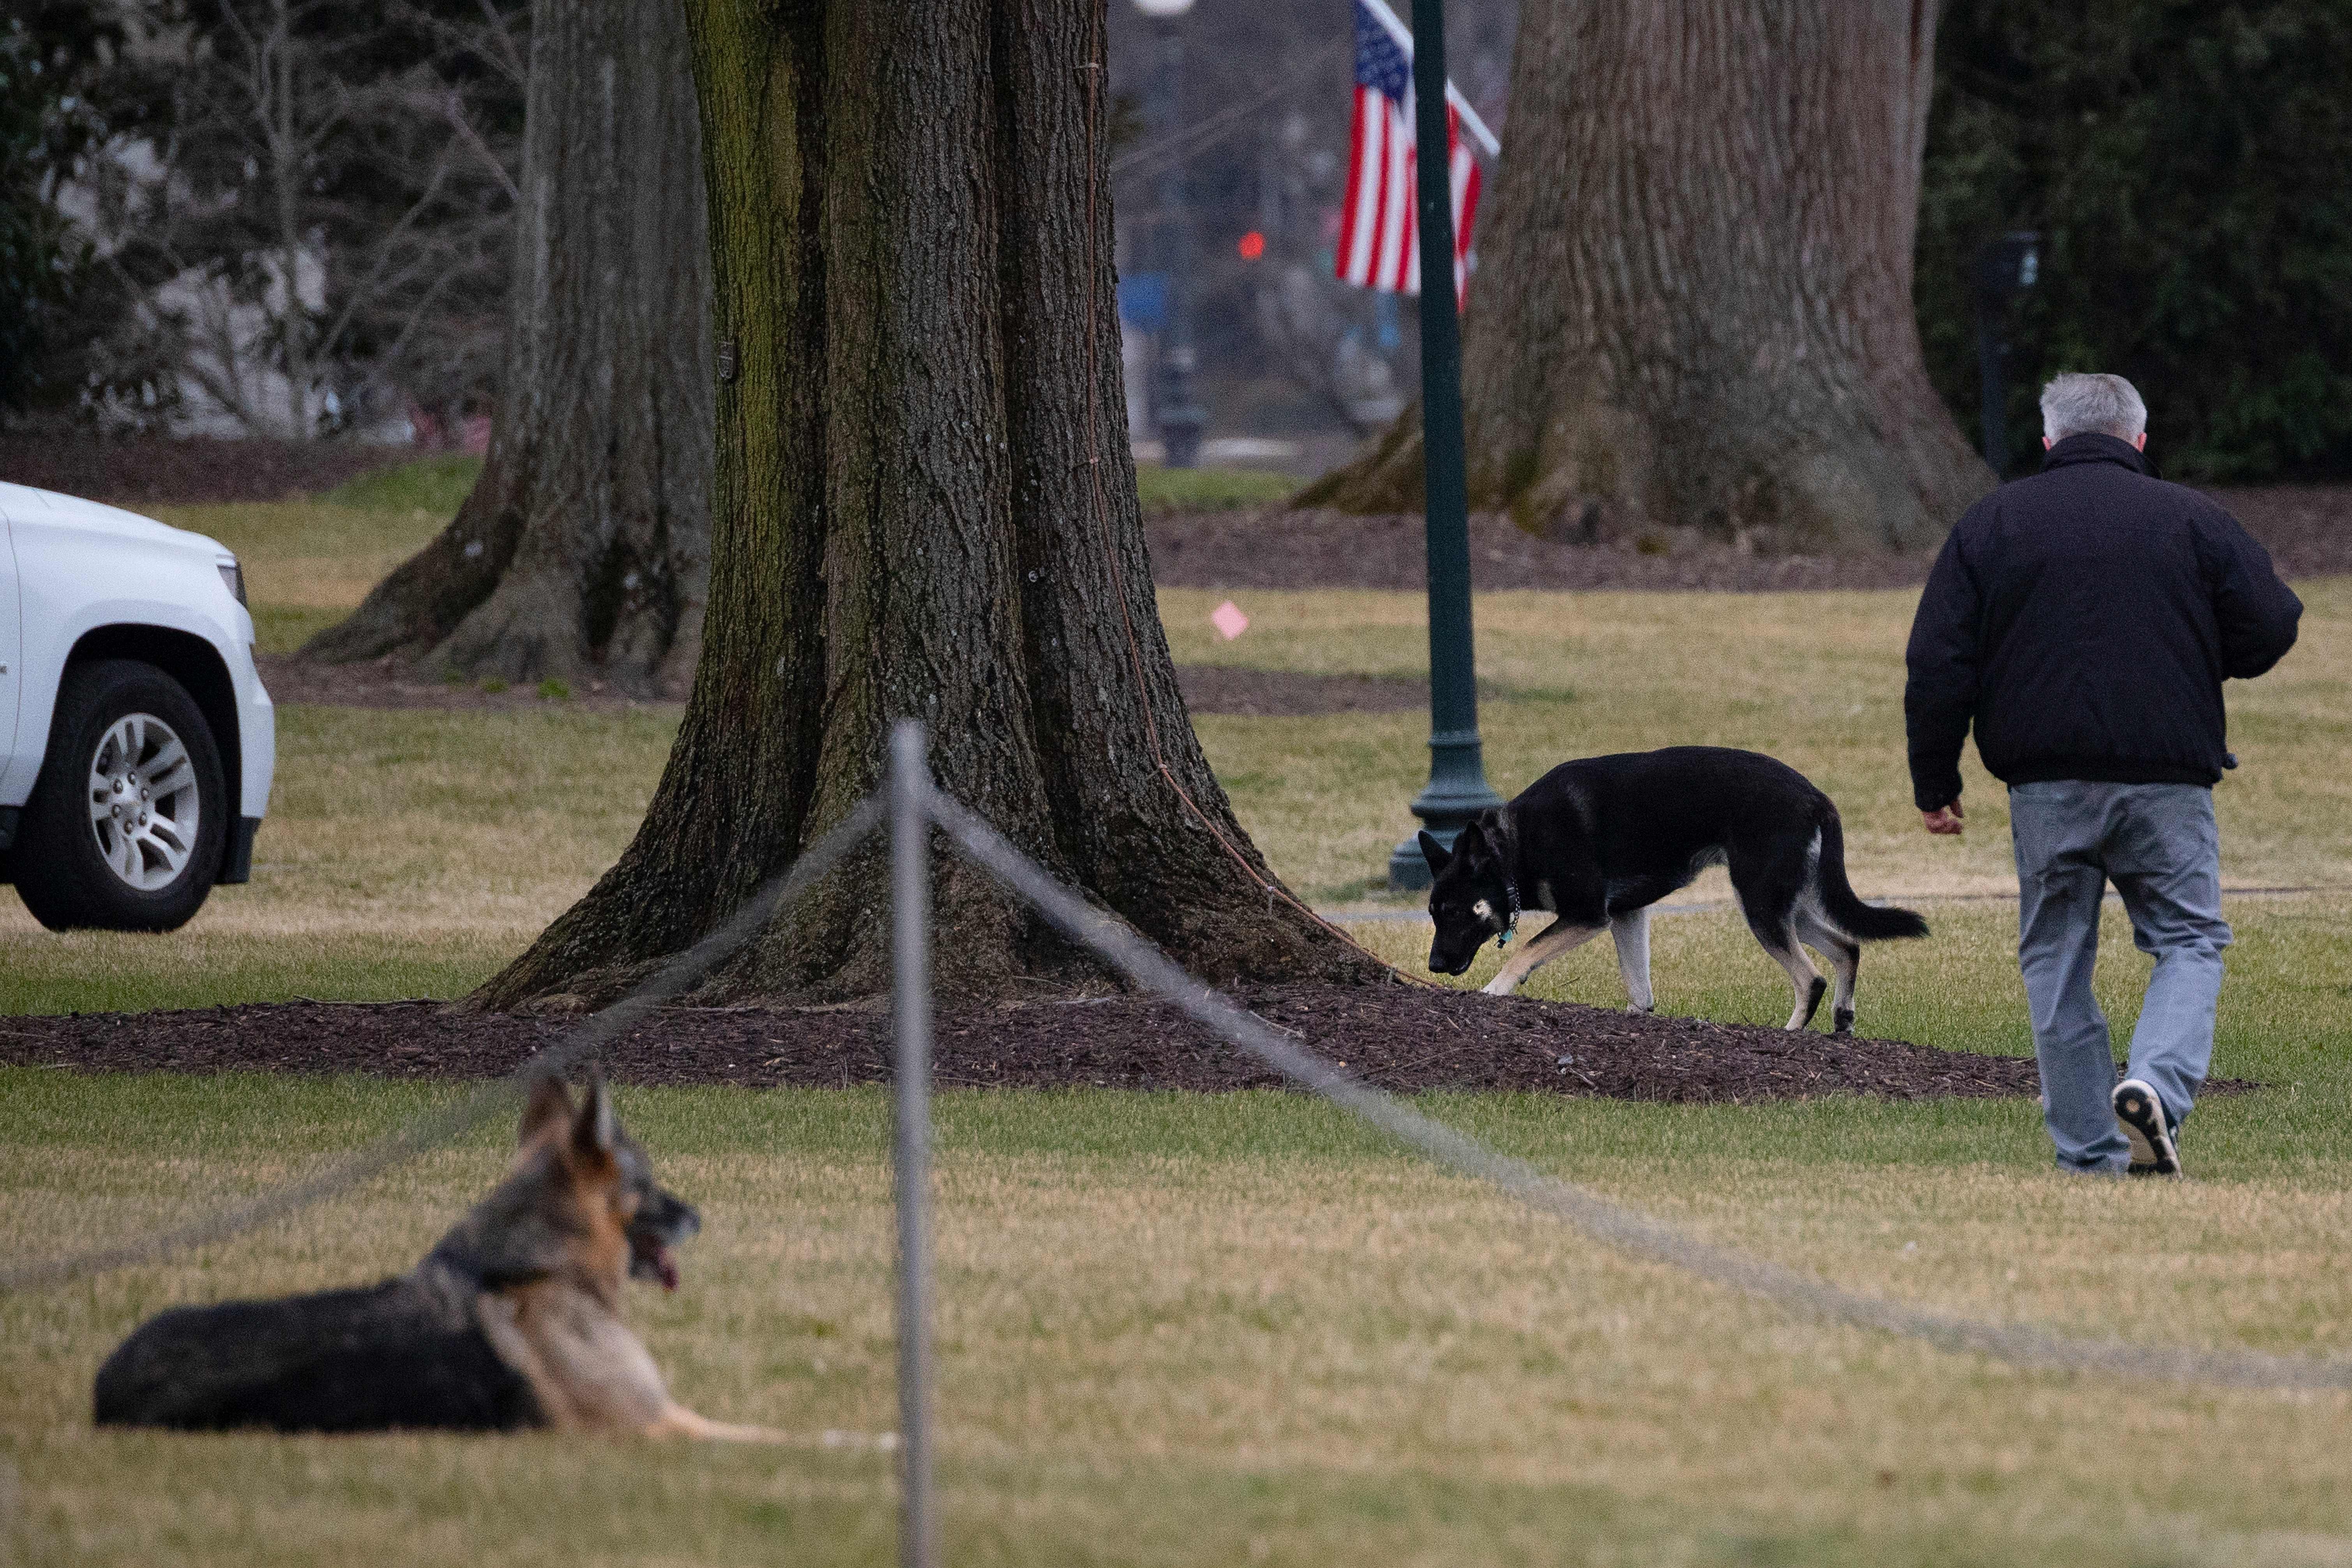 First dogs Champ and Major are seen on the South Lawn of the White House in Washington, D.C. on Jan. 25, 2021. 